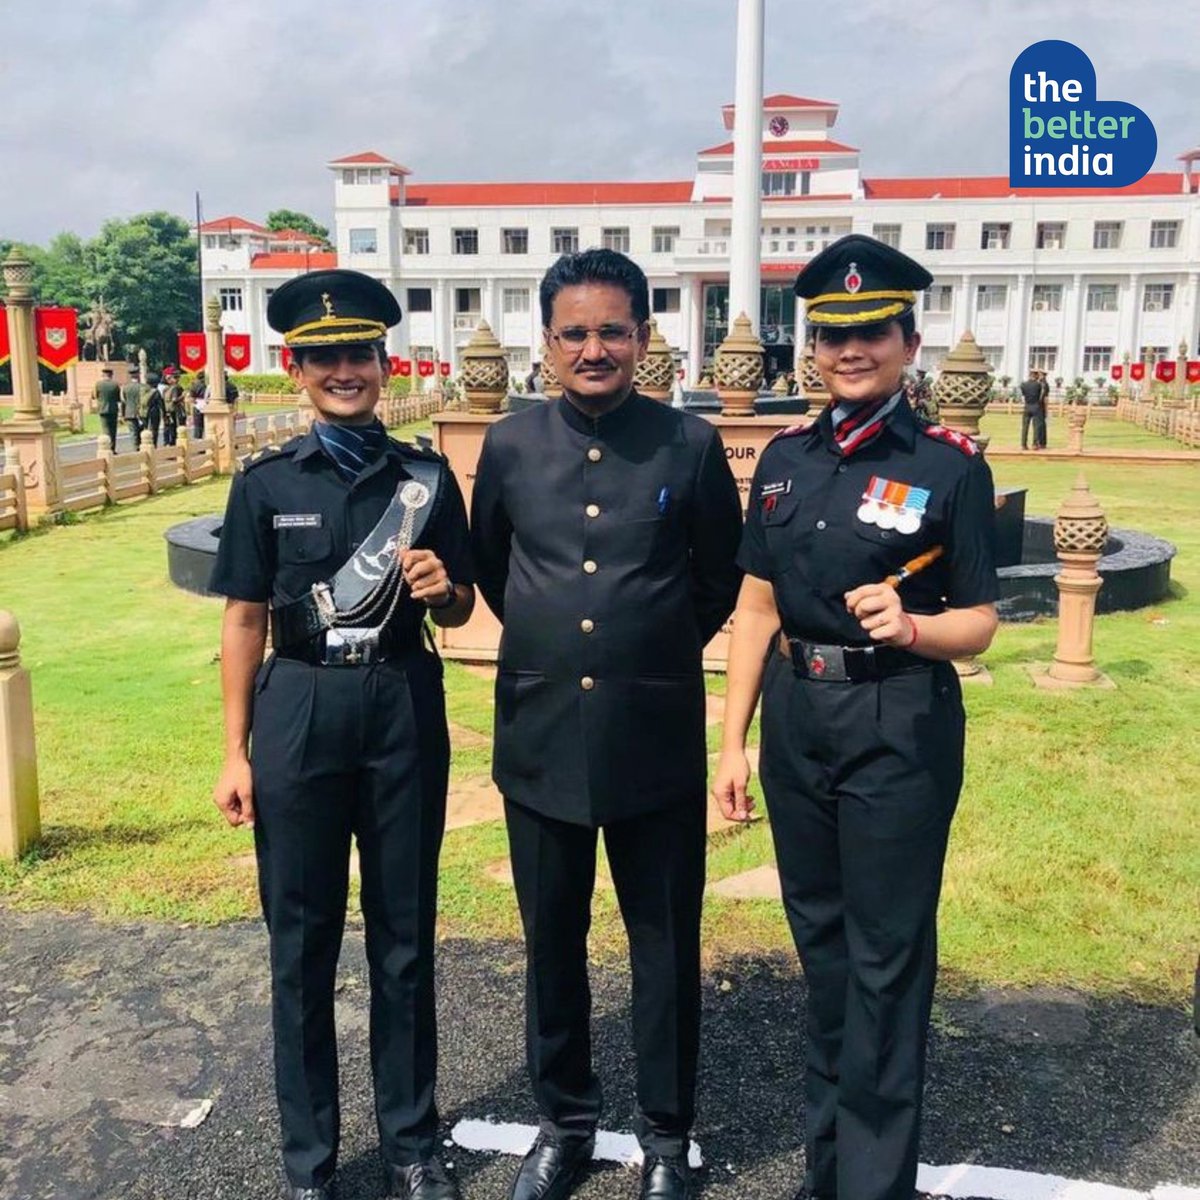 The granddaughters of Param Vir Chakra Shaitan Singh Bhati, Divya and Dimple Singh Bhati both serve in the #IndianArmy.

#ProudMoment #Respect #WomeninArmy #GirlChildDay